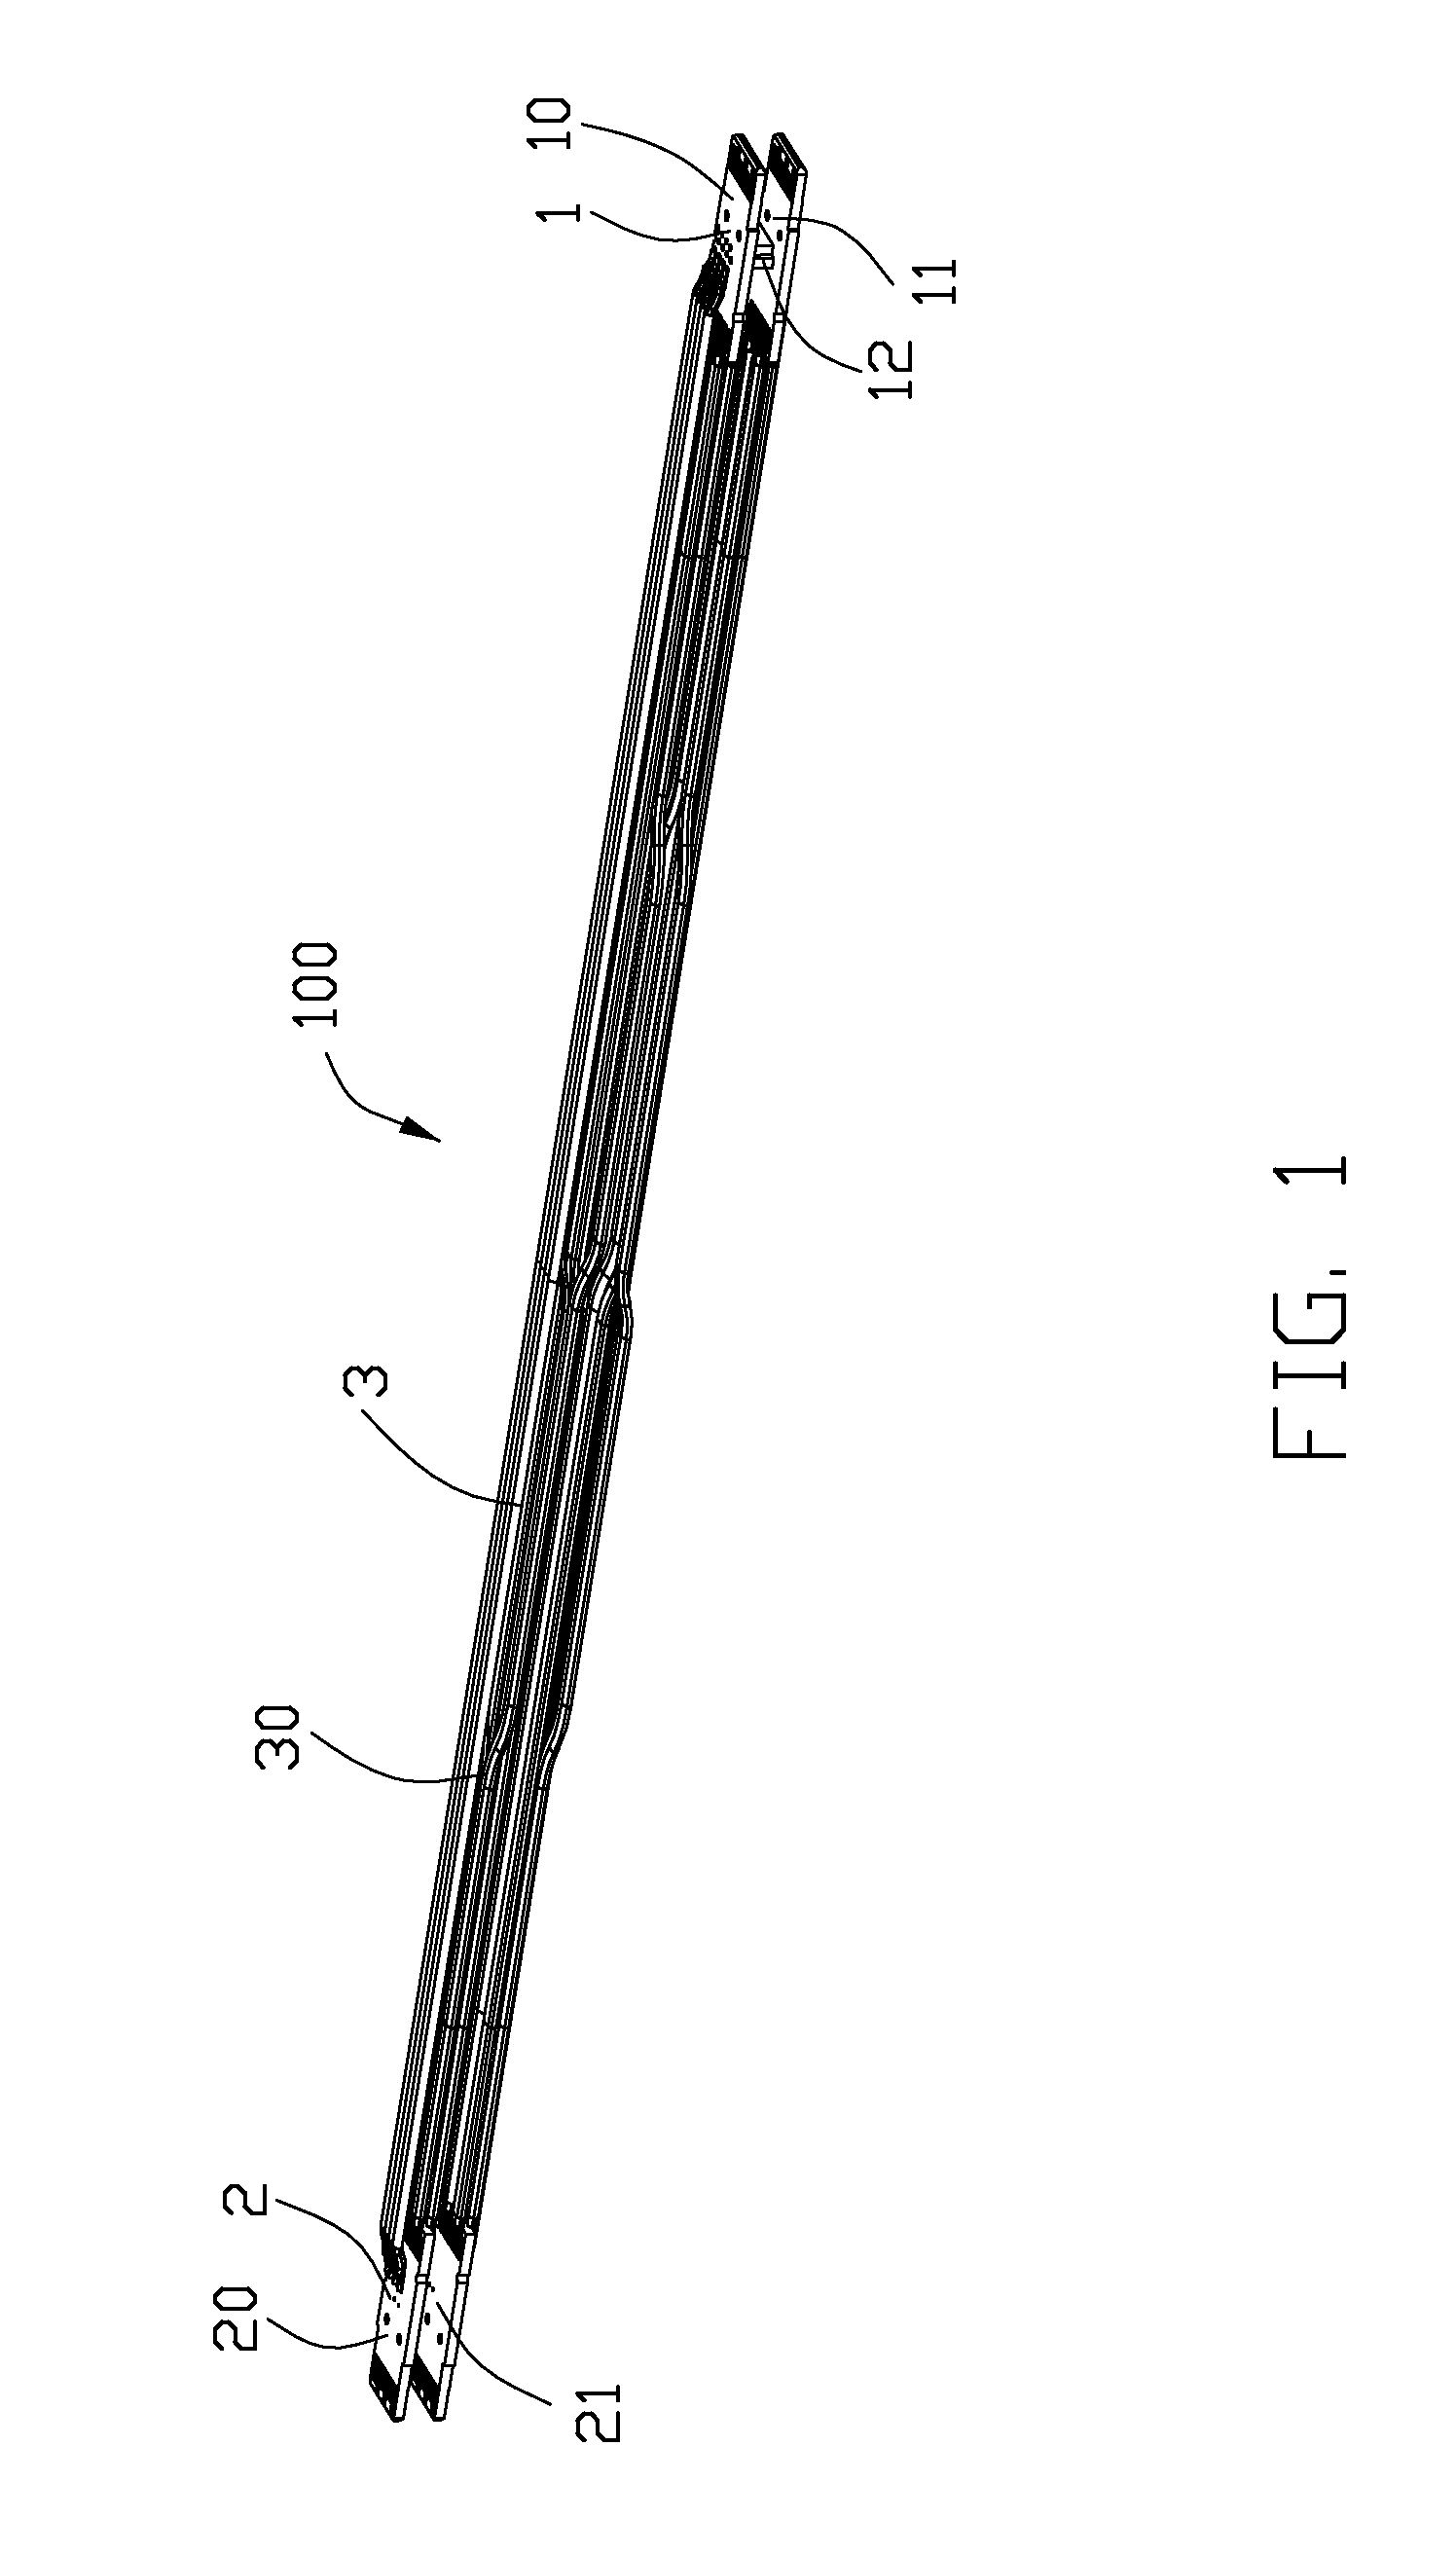 Cable connector assembly having simple wiring arrangement between two end connectors